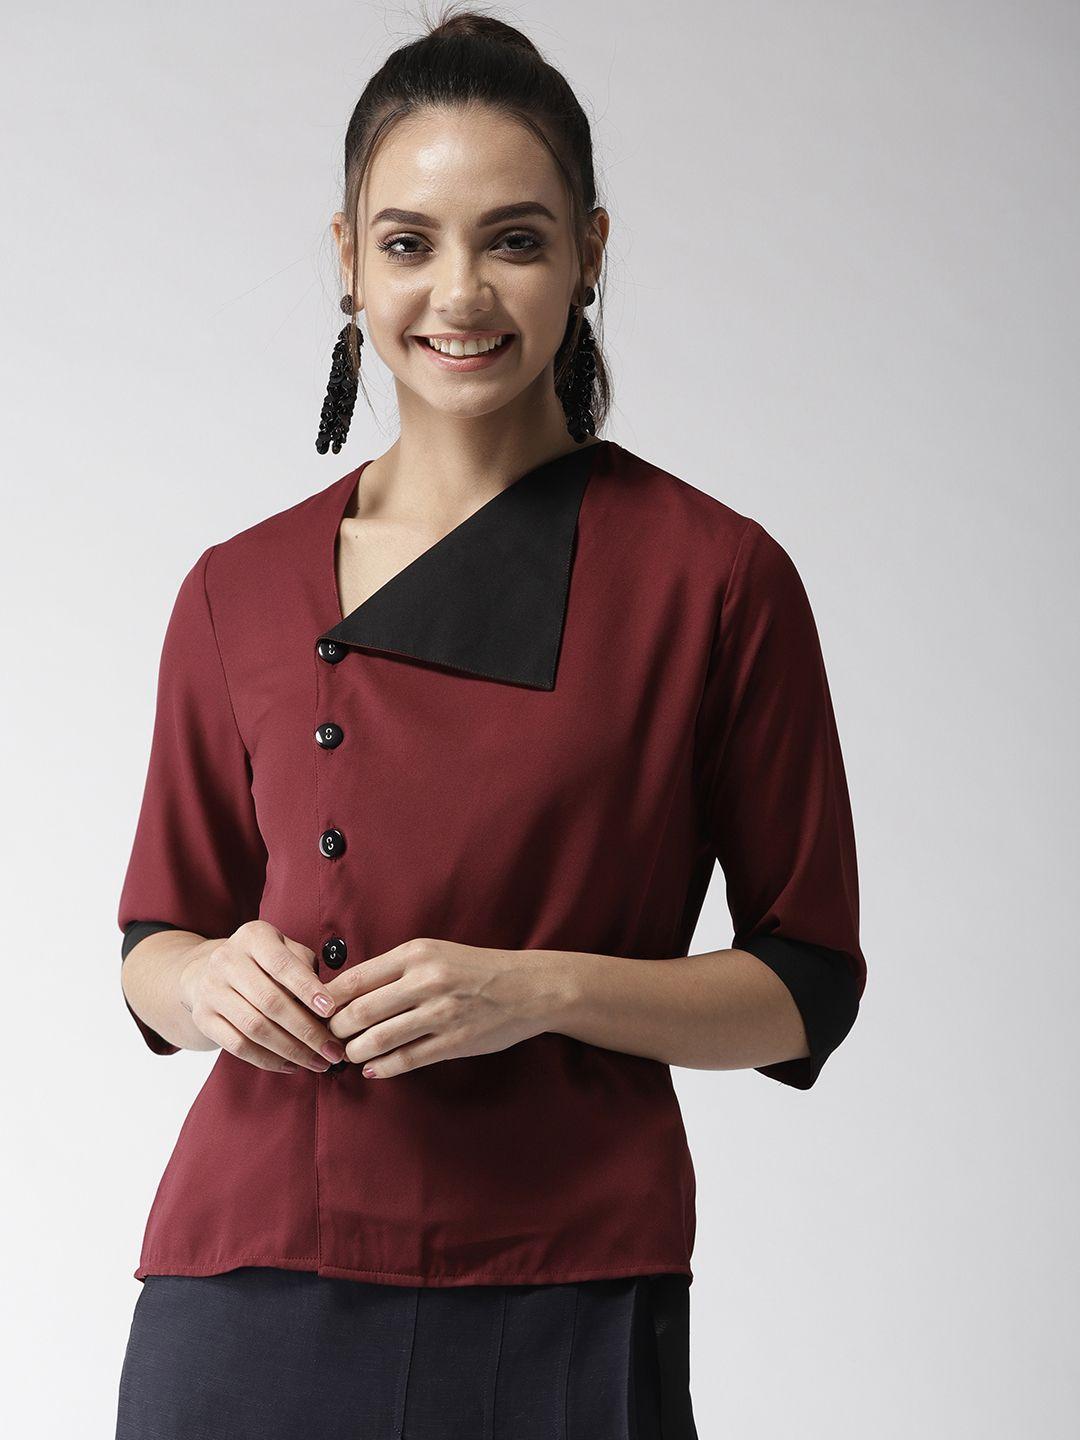 style-quotient-women-maroon-solid-shirt-style-top